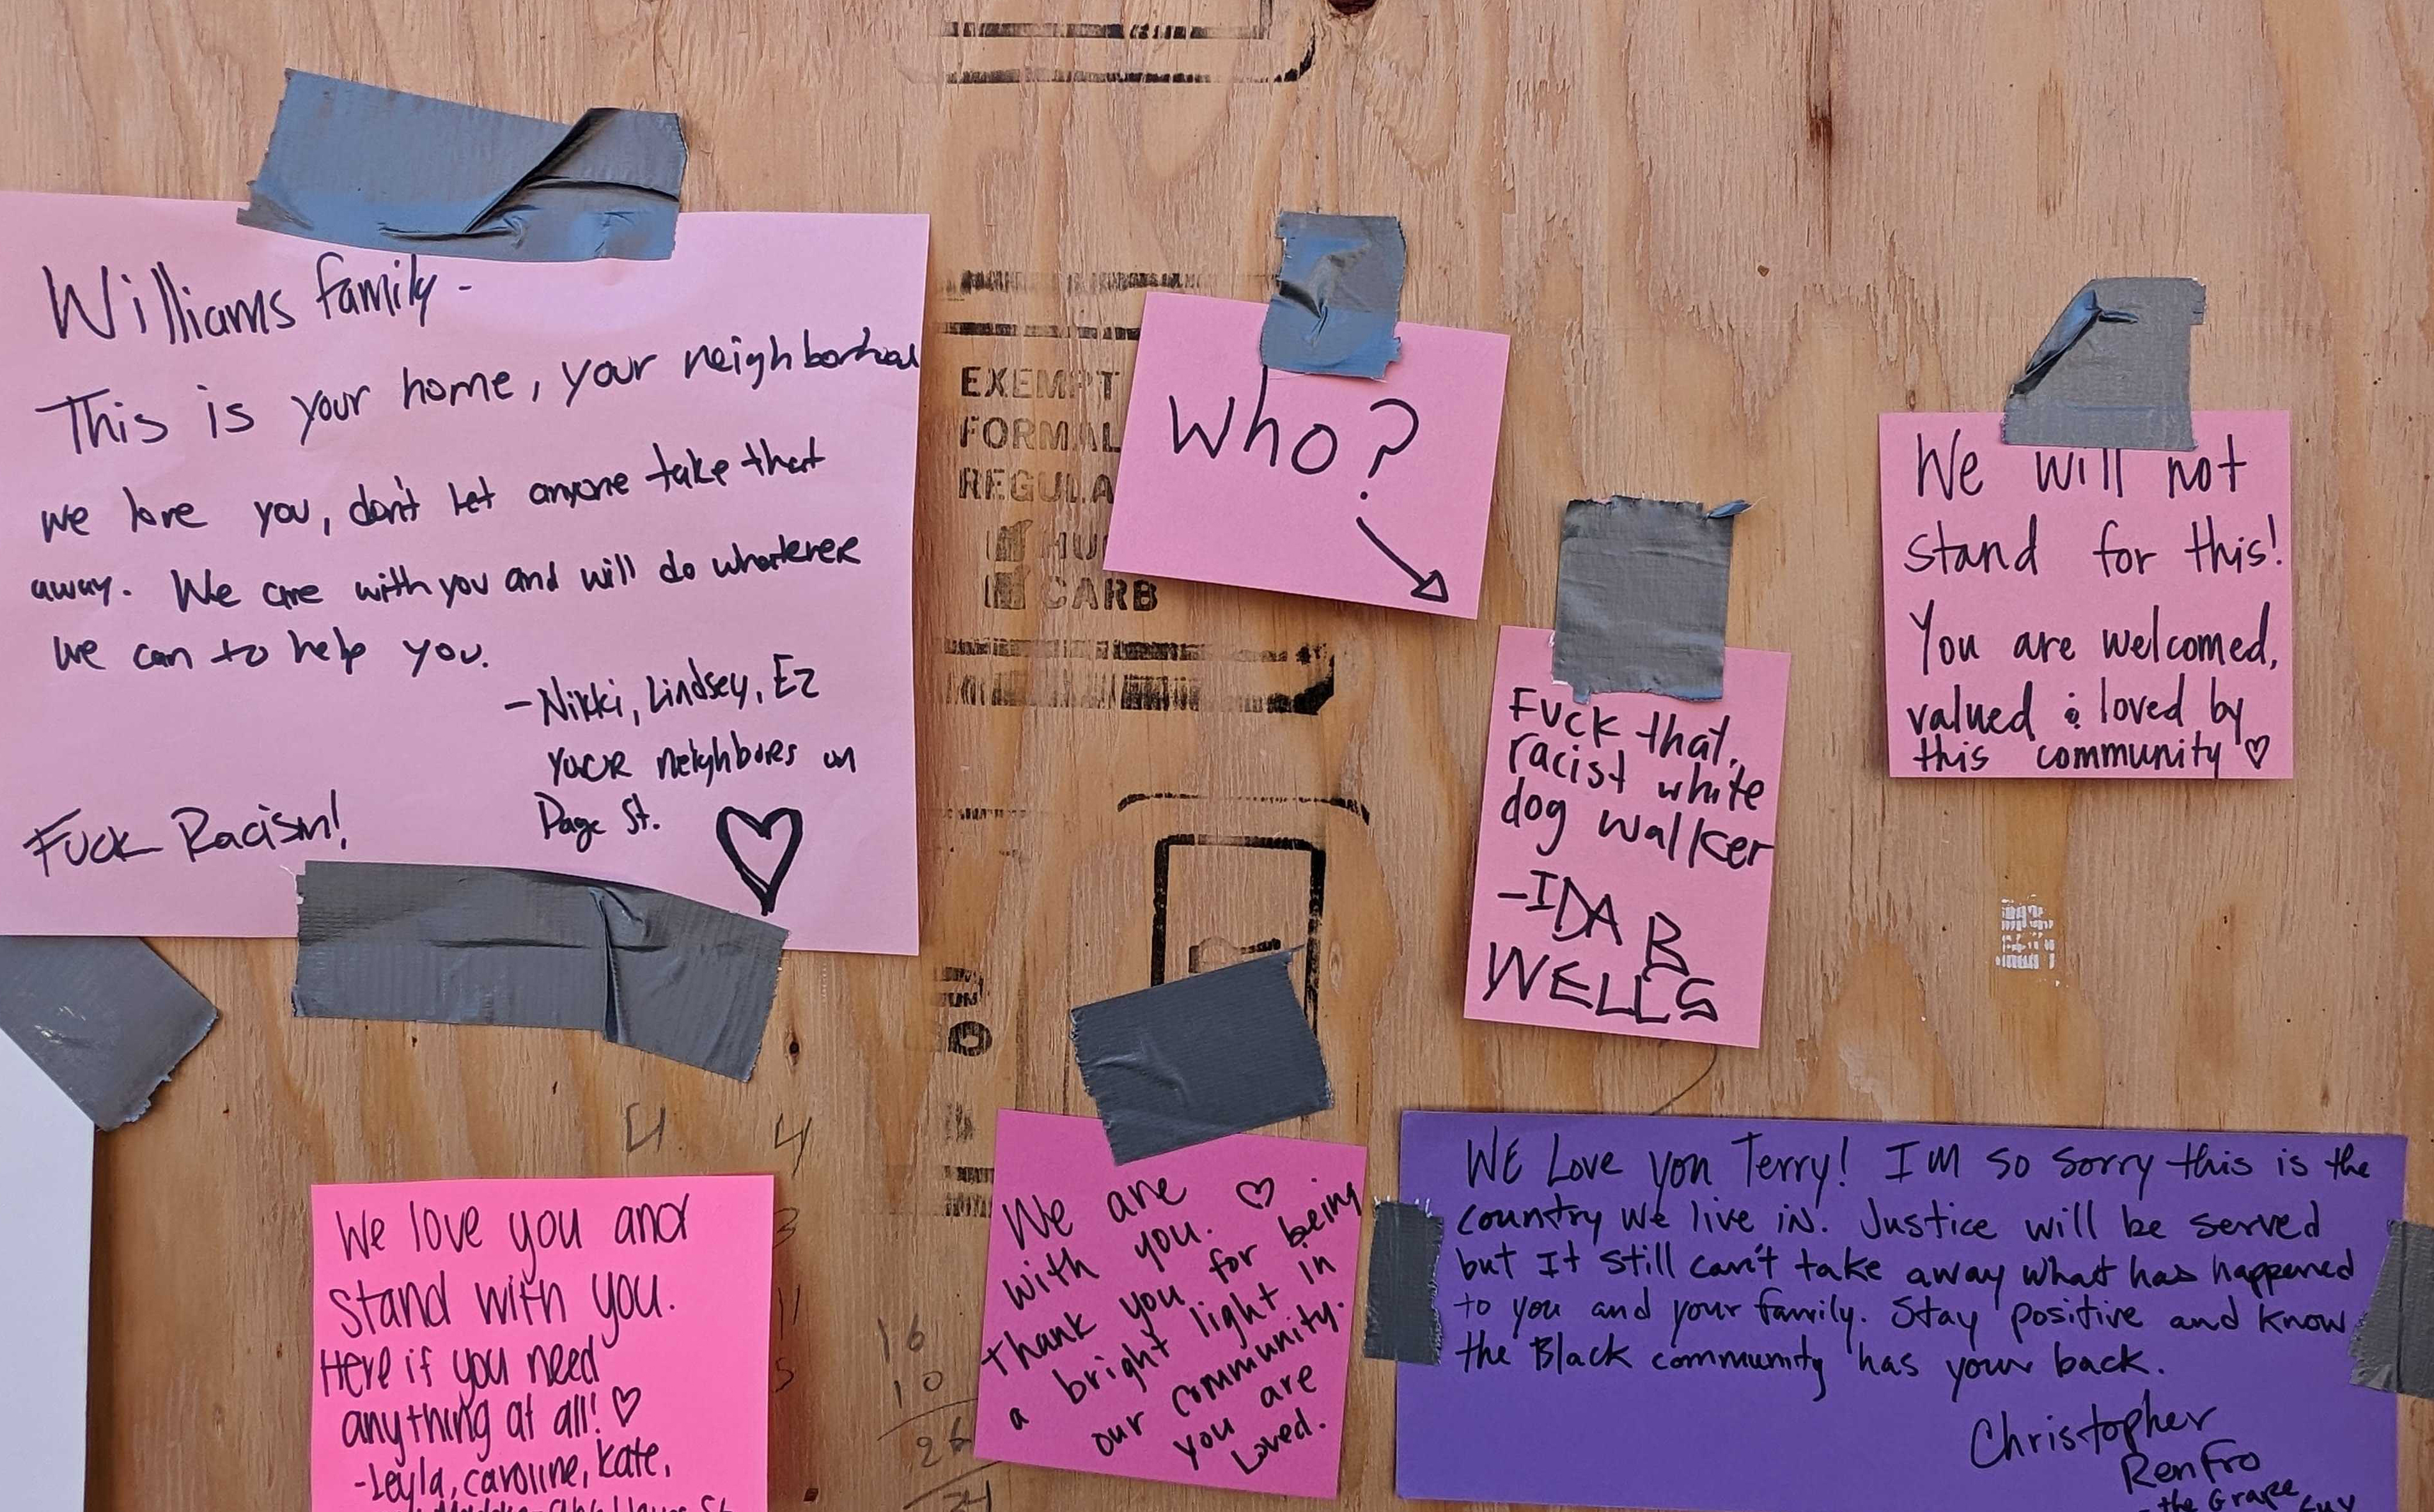 A wooden board has several messages written on pink and purple sticky notes. The notes express support against racism, offering love and solidarity to the Williams family. Duct tape secures the notes.